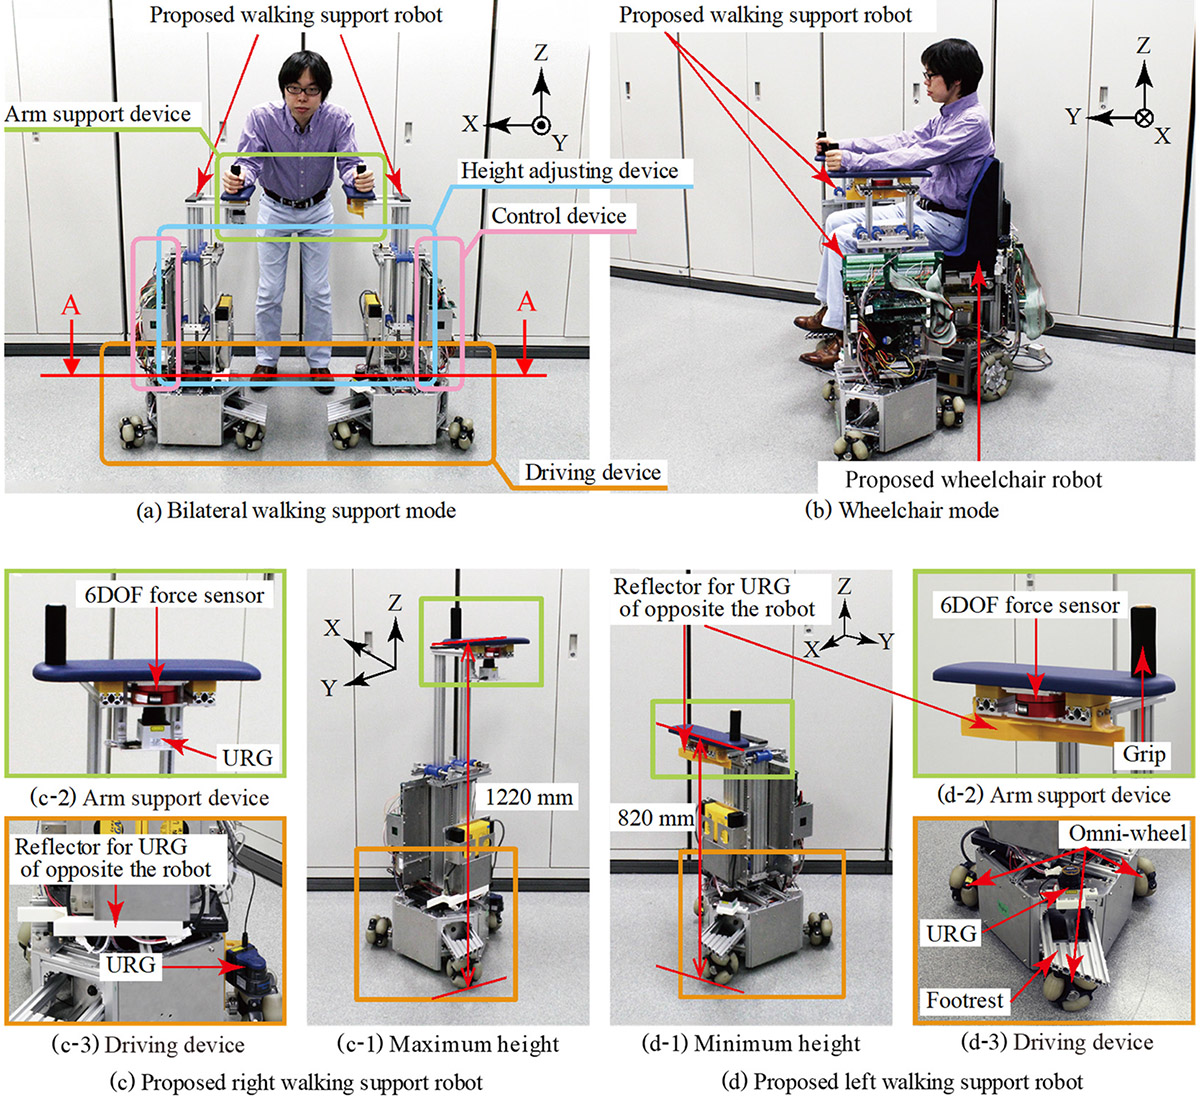 Gait Rehabilitation and Locomotion Support System Using a Distributed Controlled Robot System